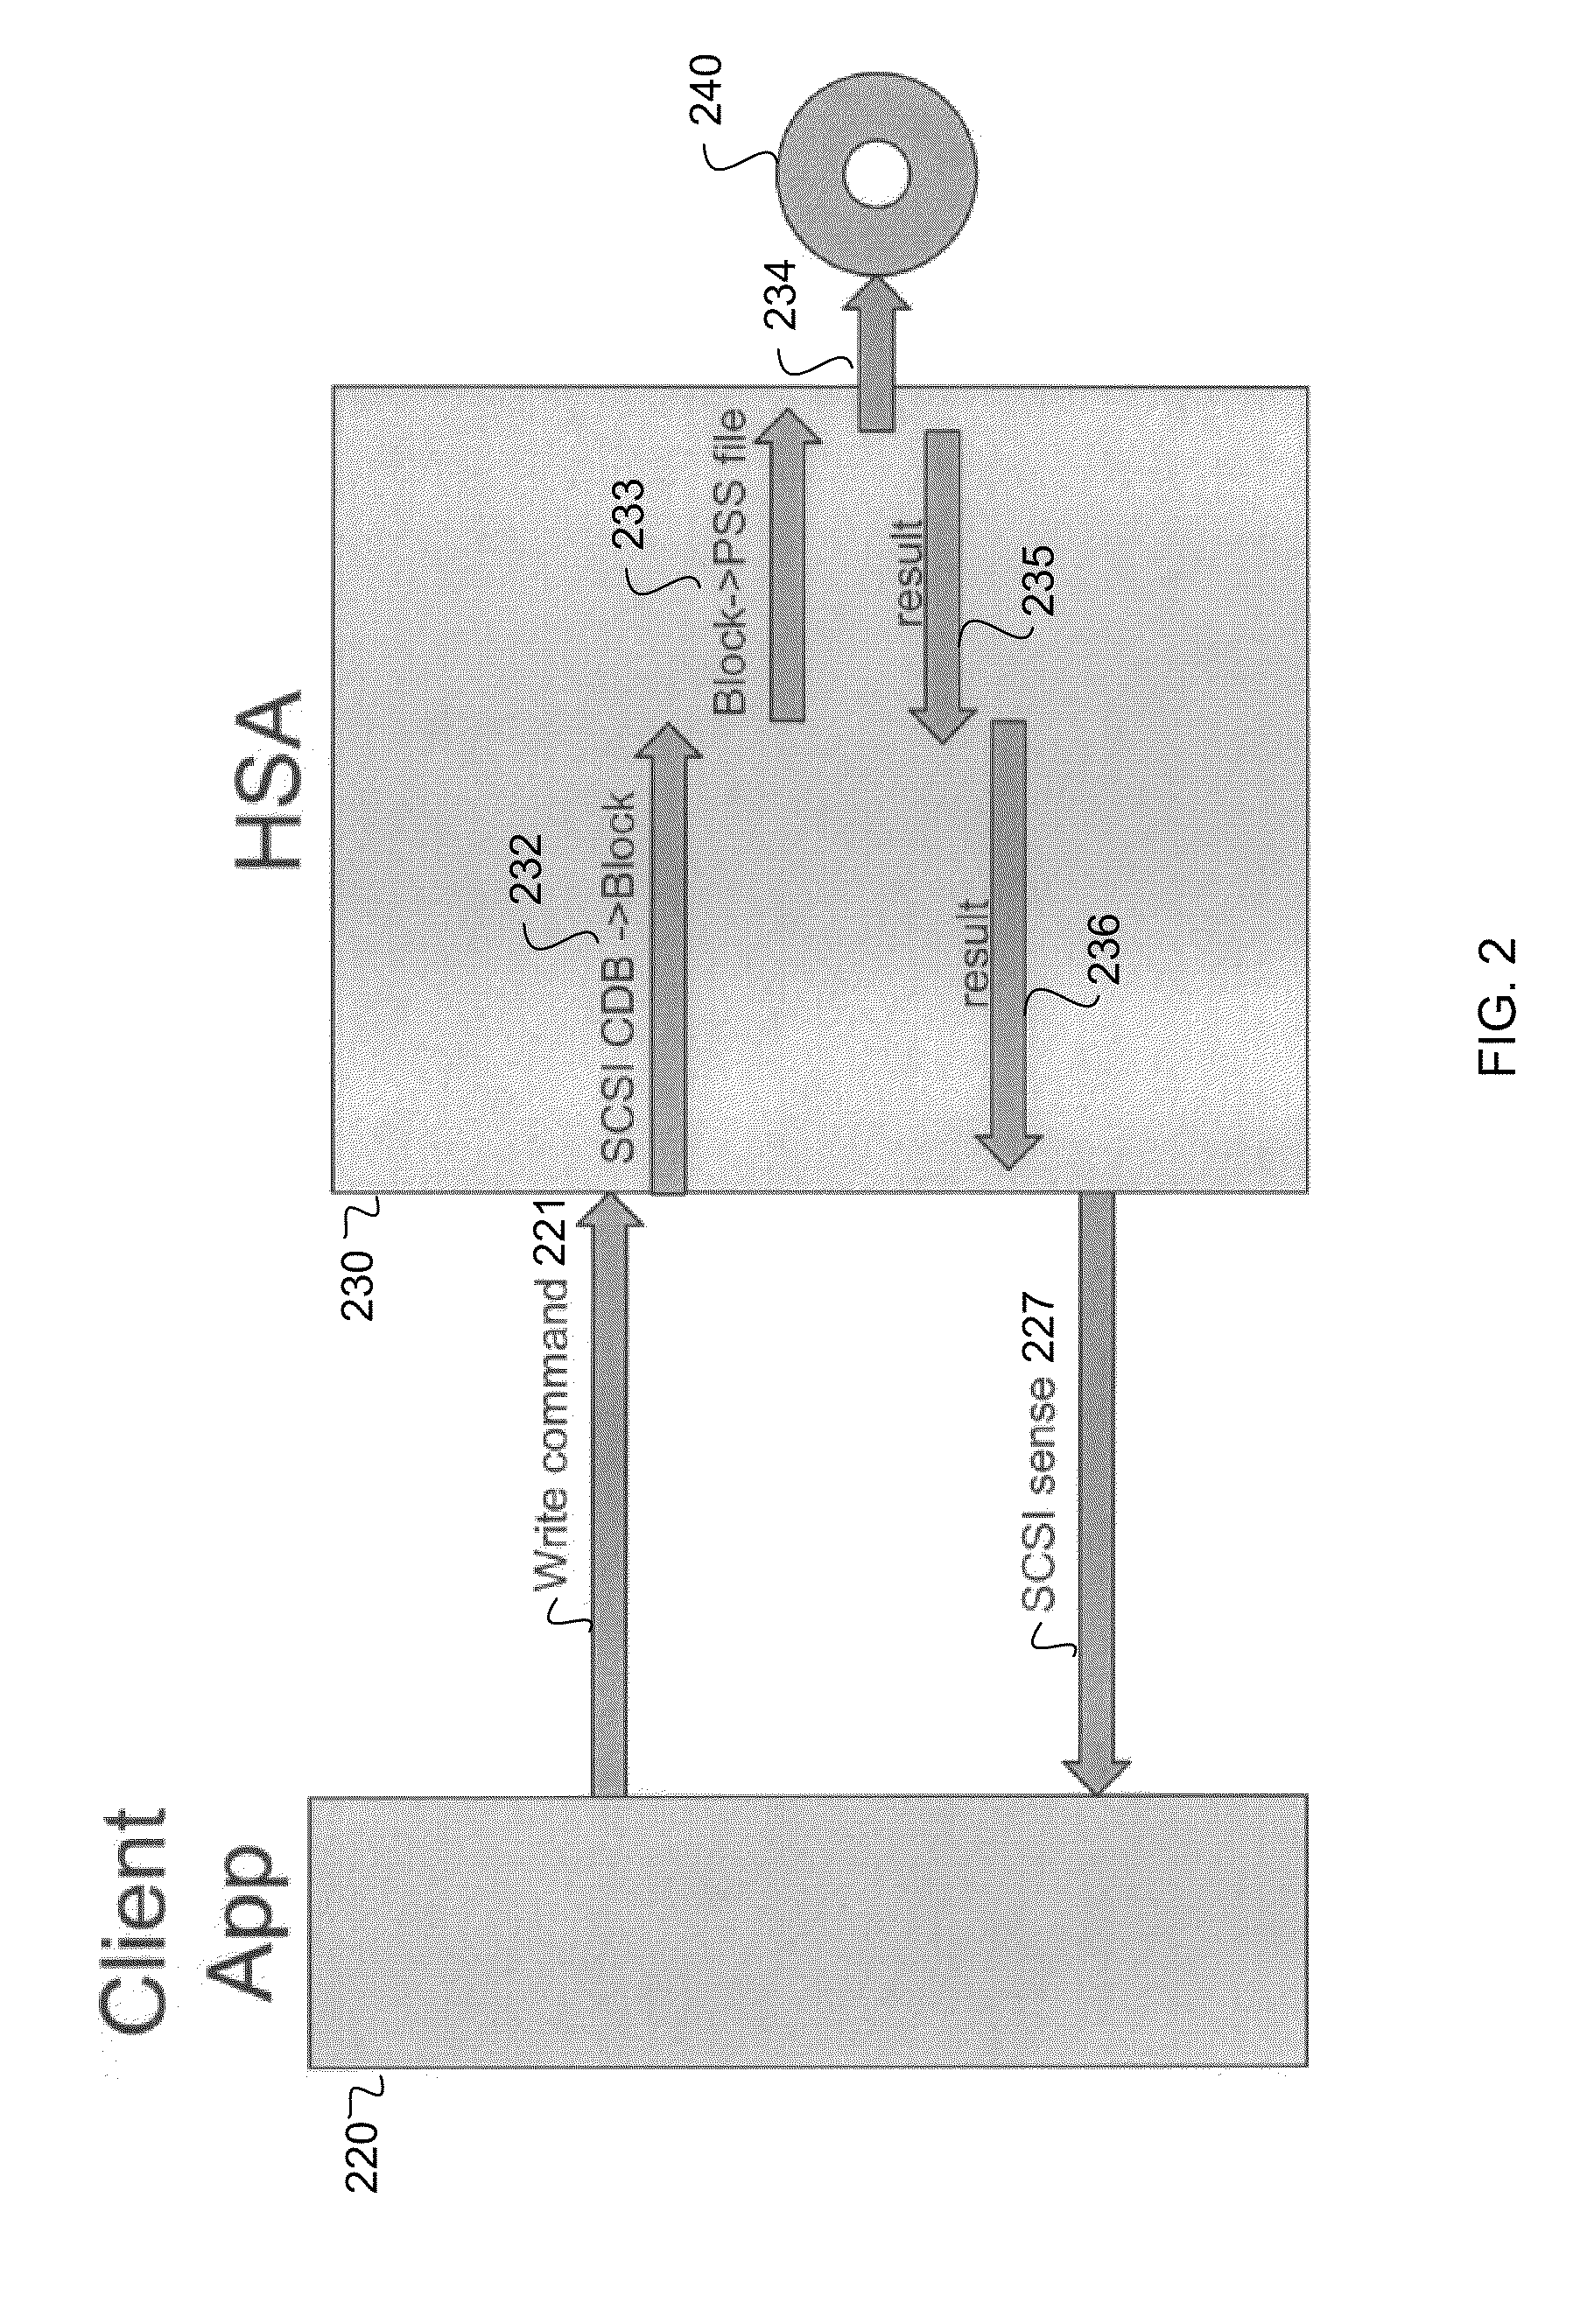 Accessing, compressing, and tracking media stored in an optical disc storage system